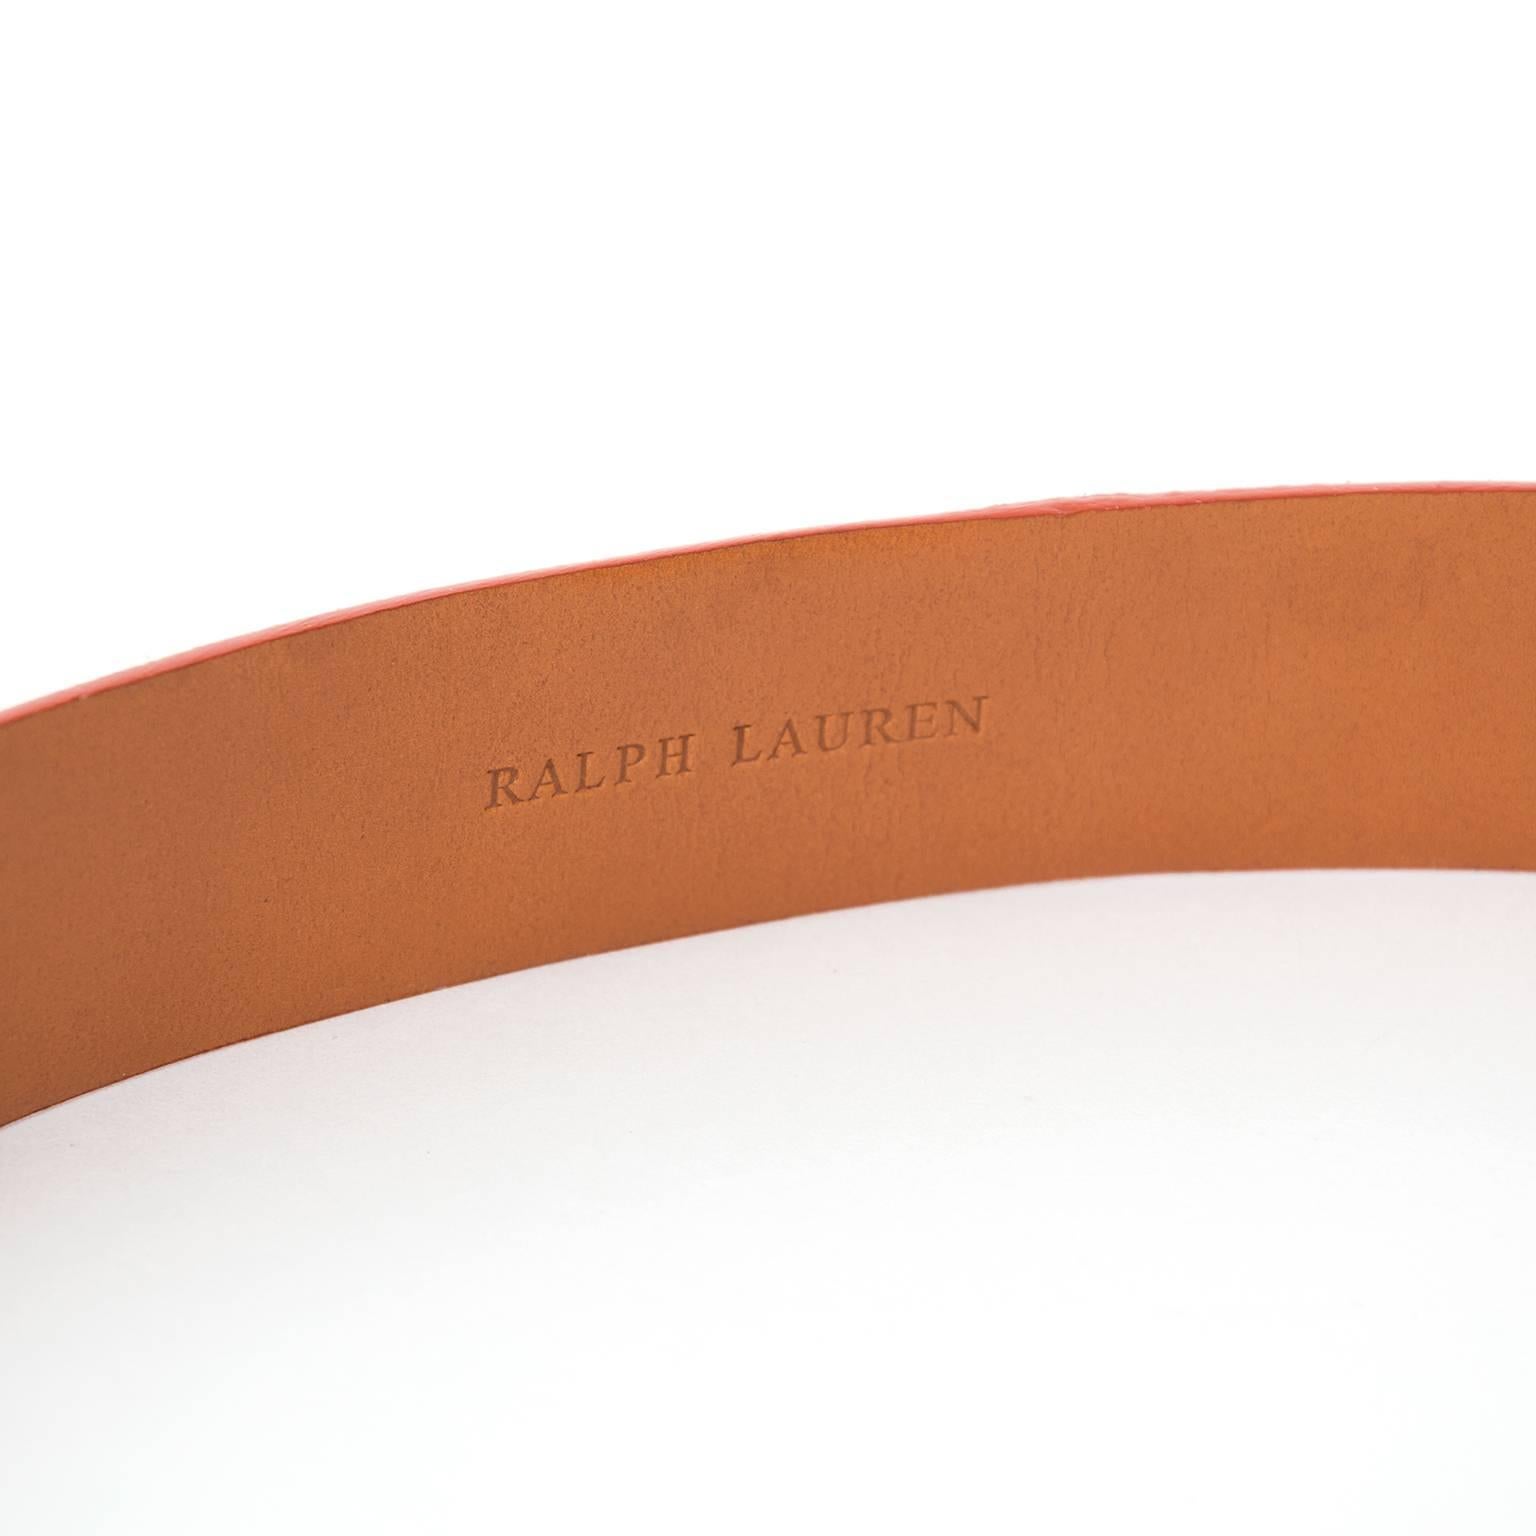 Ralph Lauren orange suede belt and clutch. 
 You'll find this belt and clutch unbelievably useful for all sorts of occasions - by day with your jeans and in the evening with a dress.